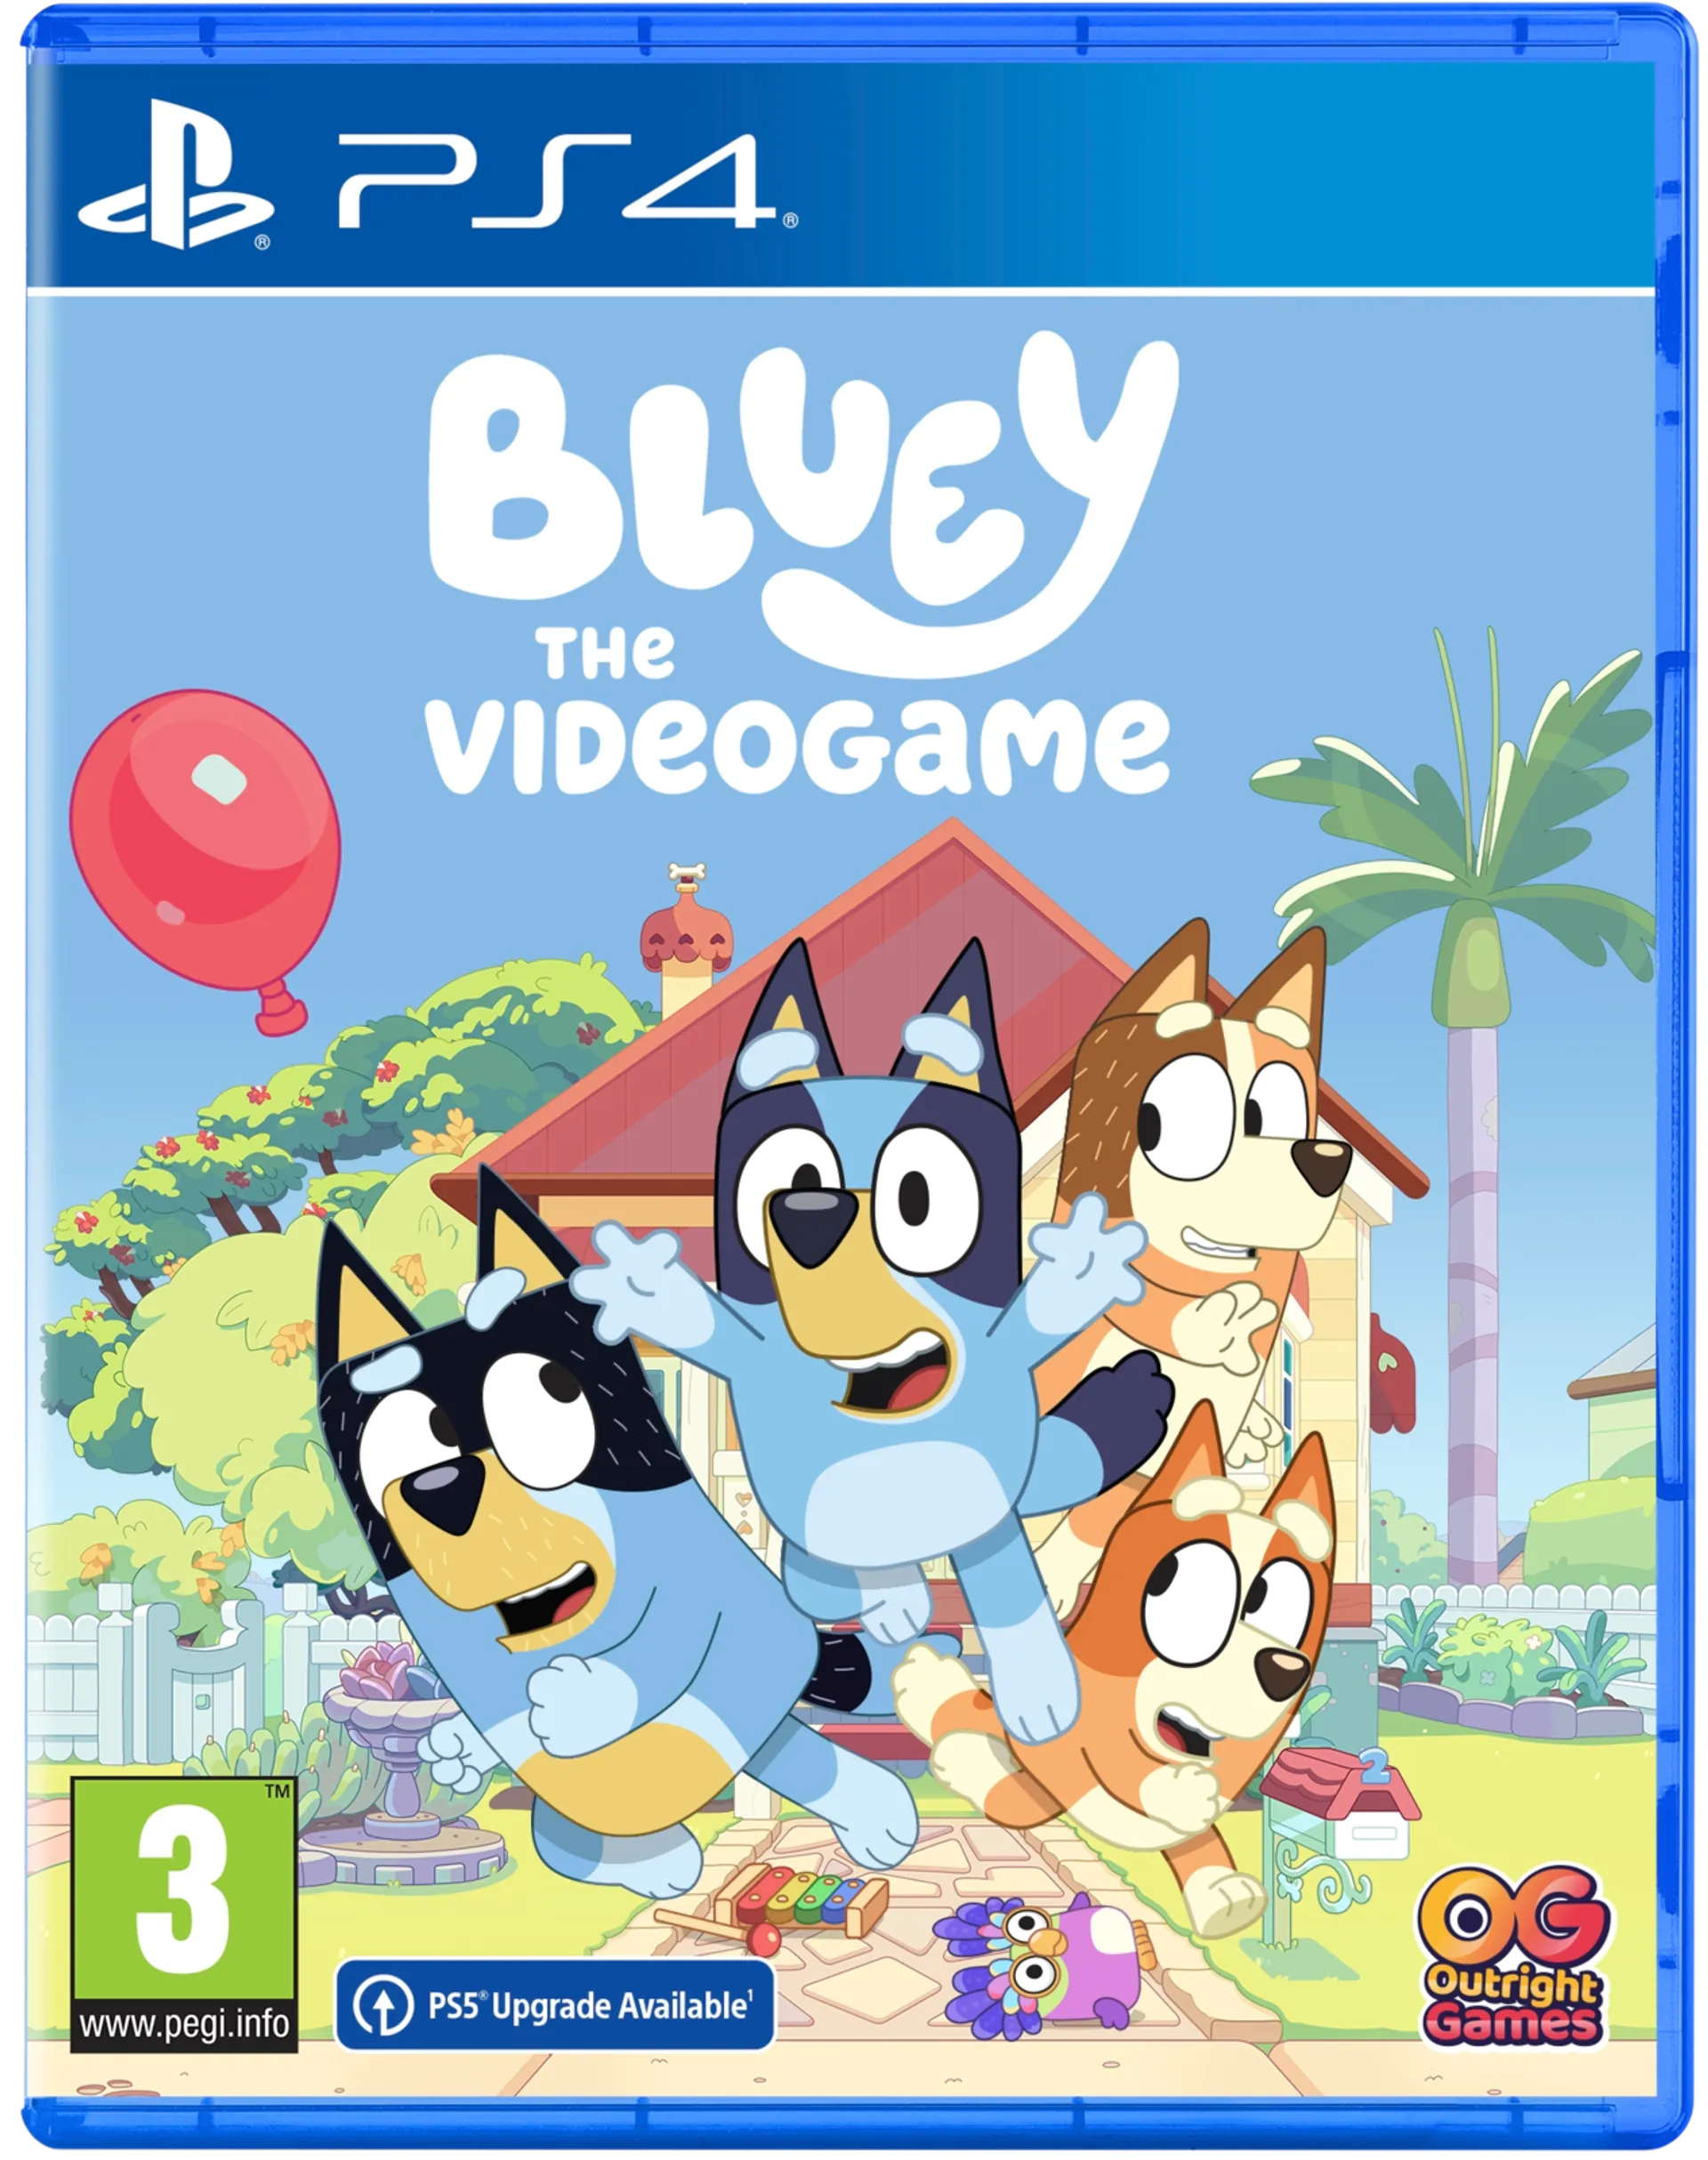 PS4 Bluey The Videogame